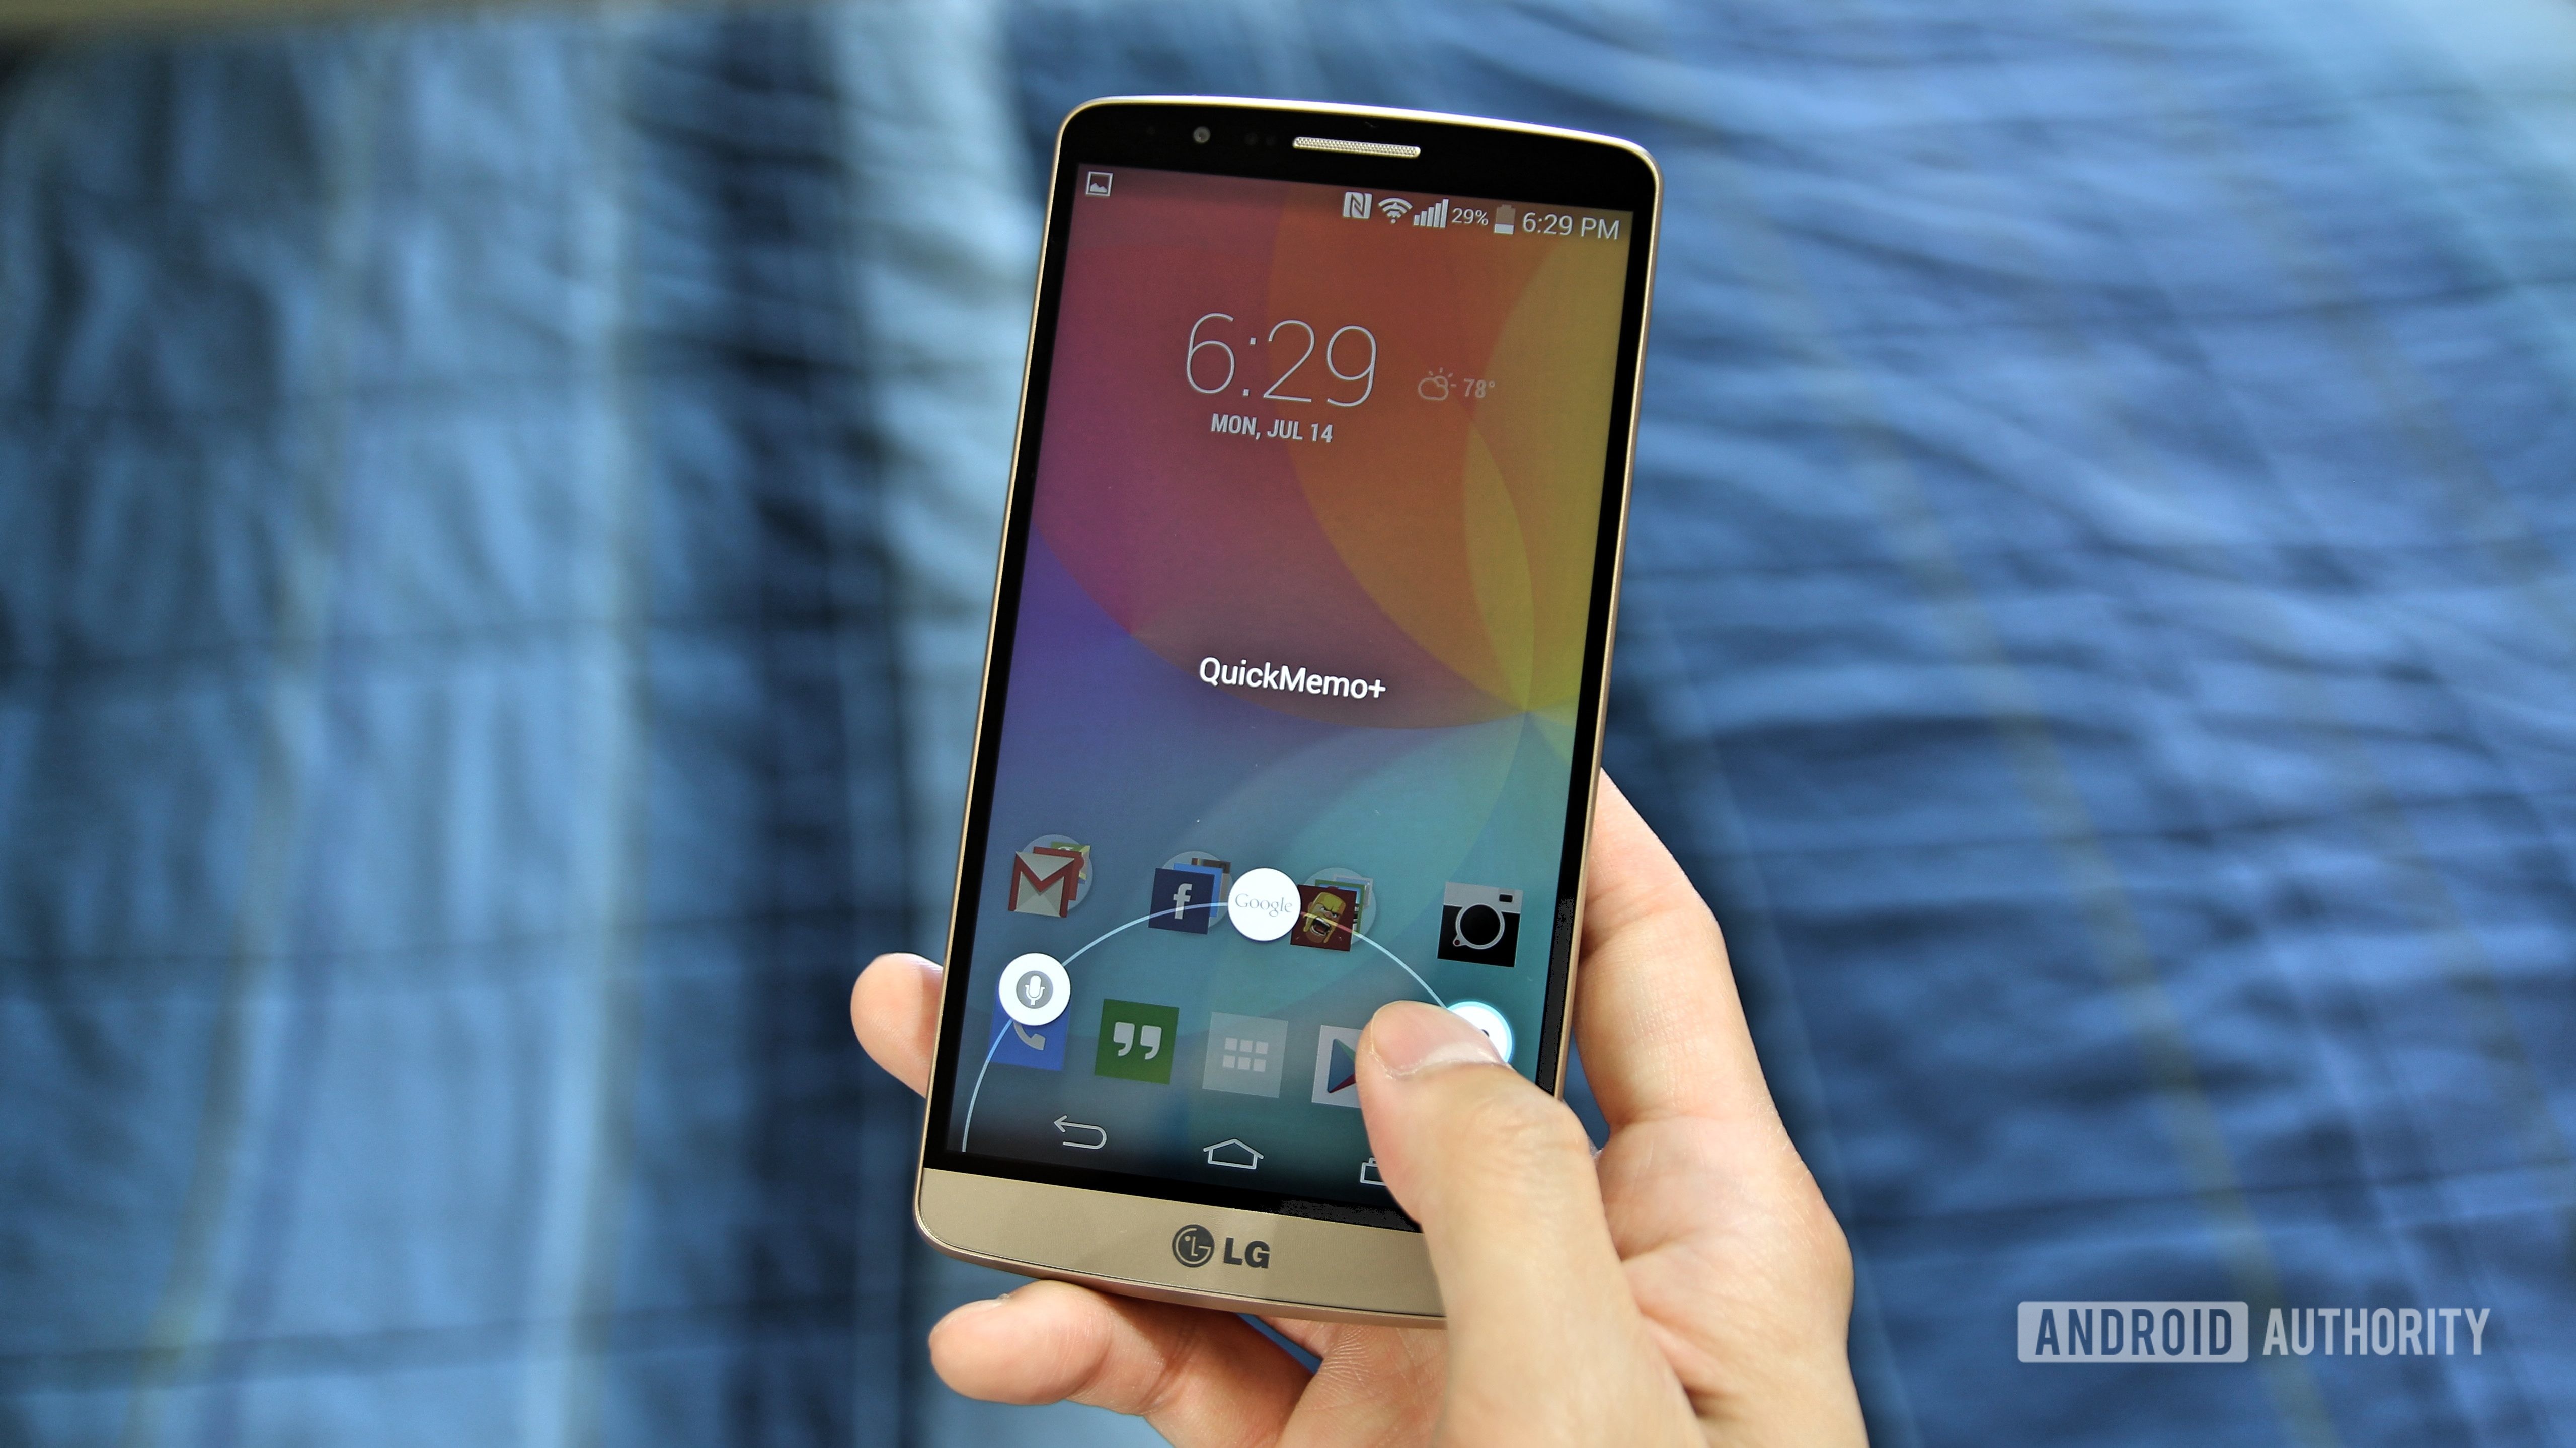 How To Take A Screenshot On The Lg G3 Android Authority